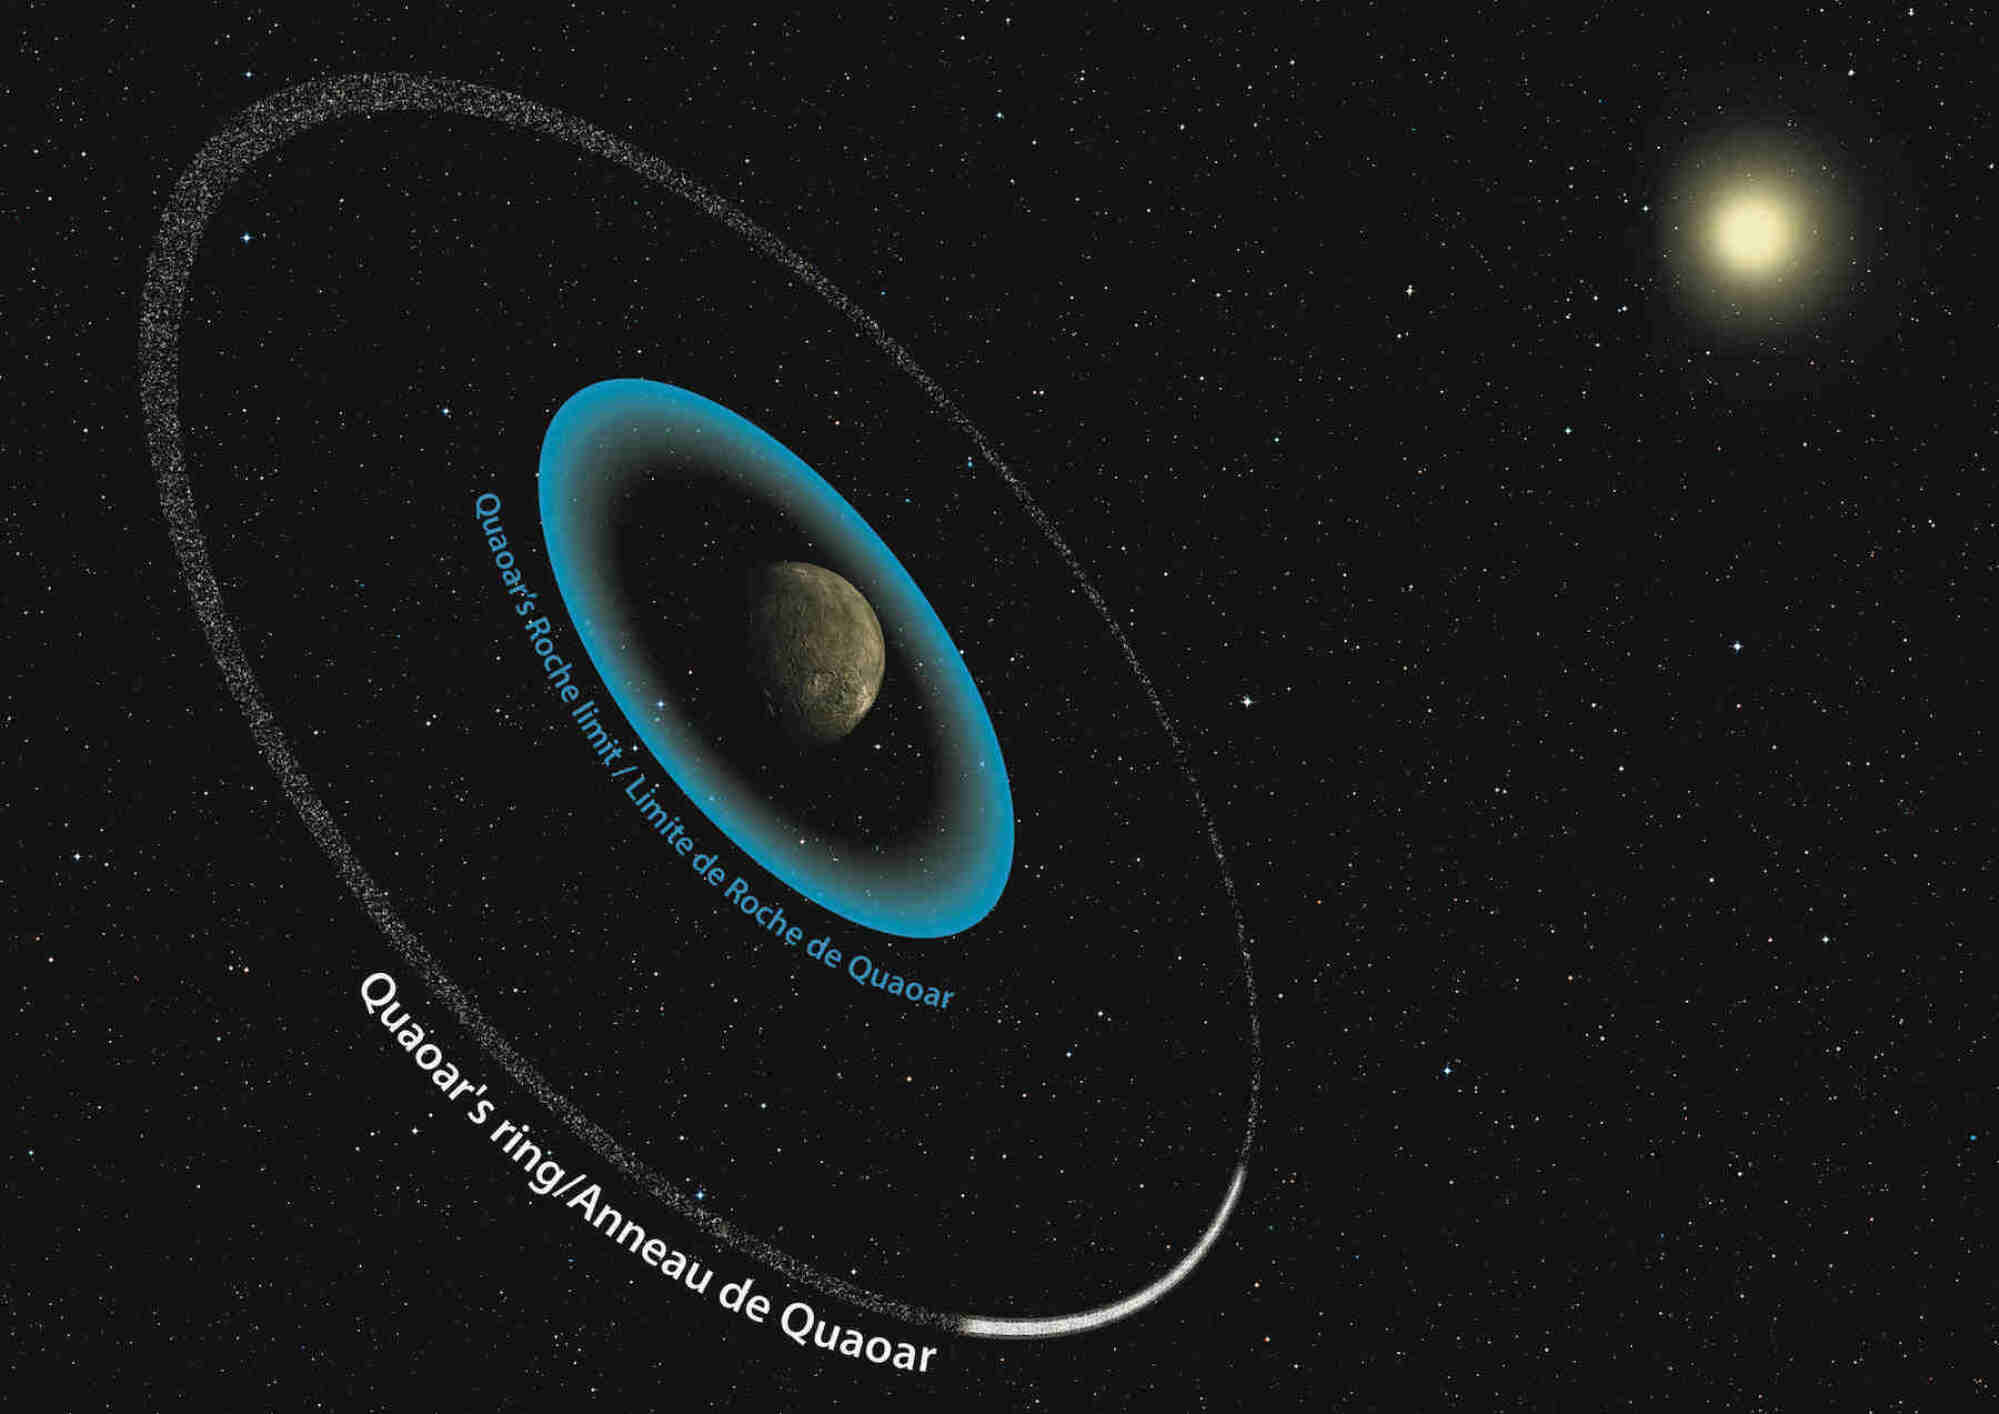 The location of the dwarf planet Quaoar's ring system.